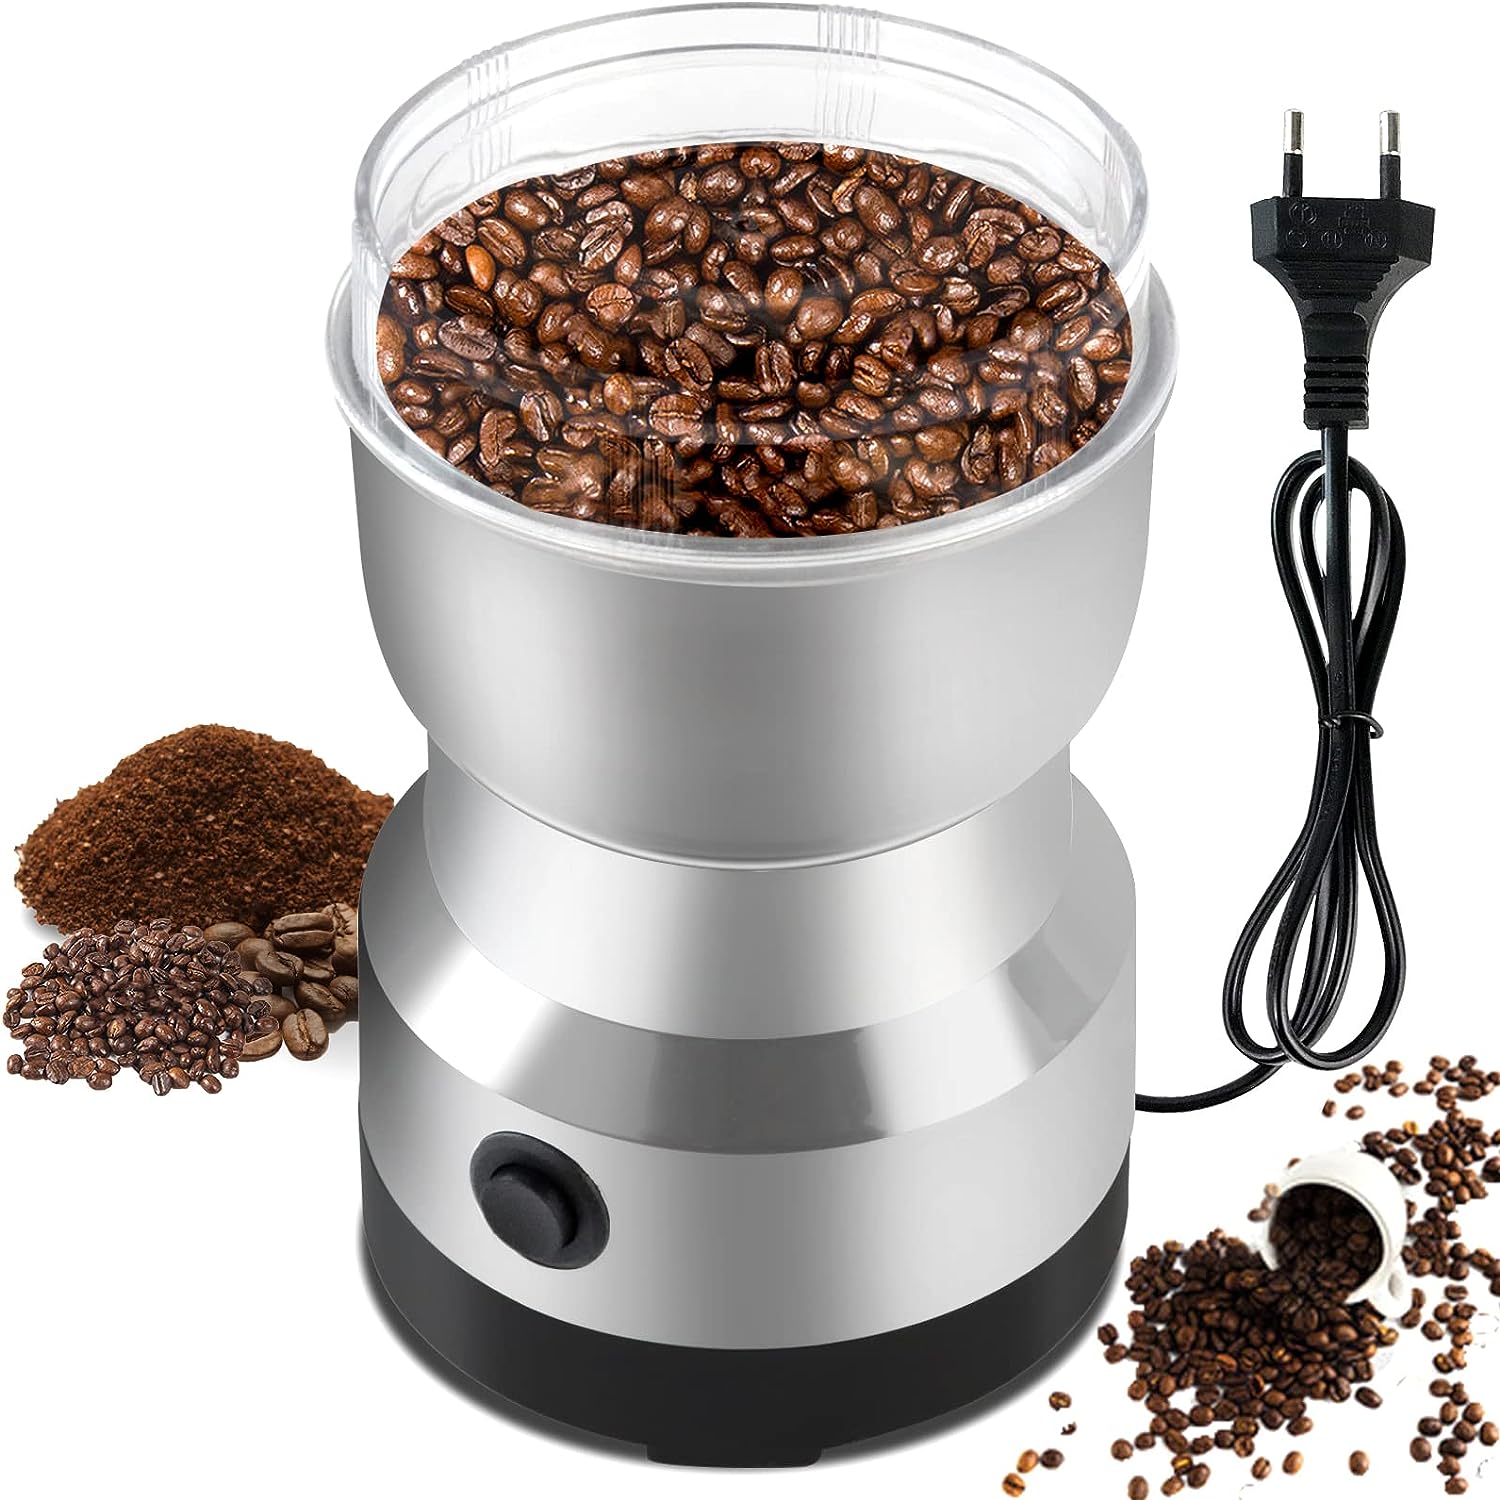 Electric Coffee Grinders, 300 ml, Multifunctional Coffee Grinder, with 4 Stainless Steel Blades for Grinding Coffee Beans, Nuts, Spices and Grains